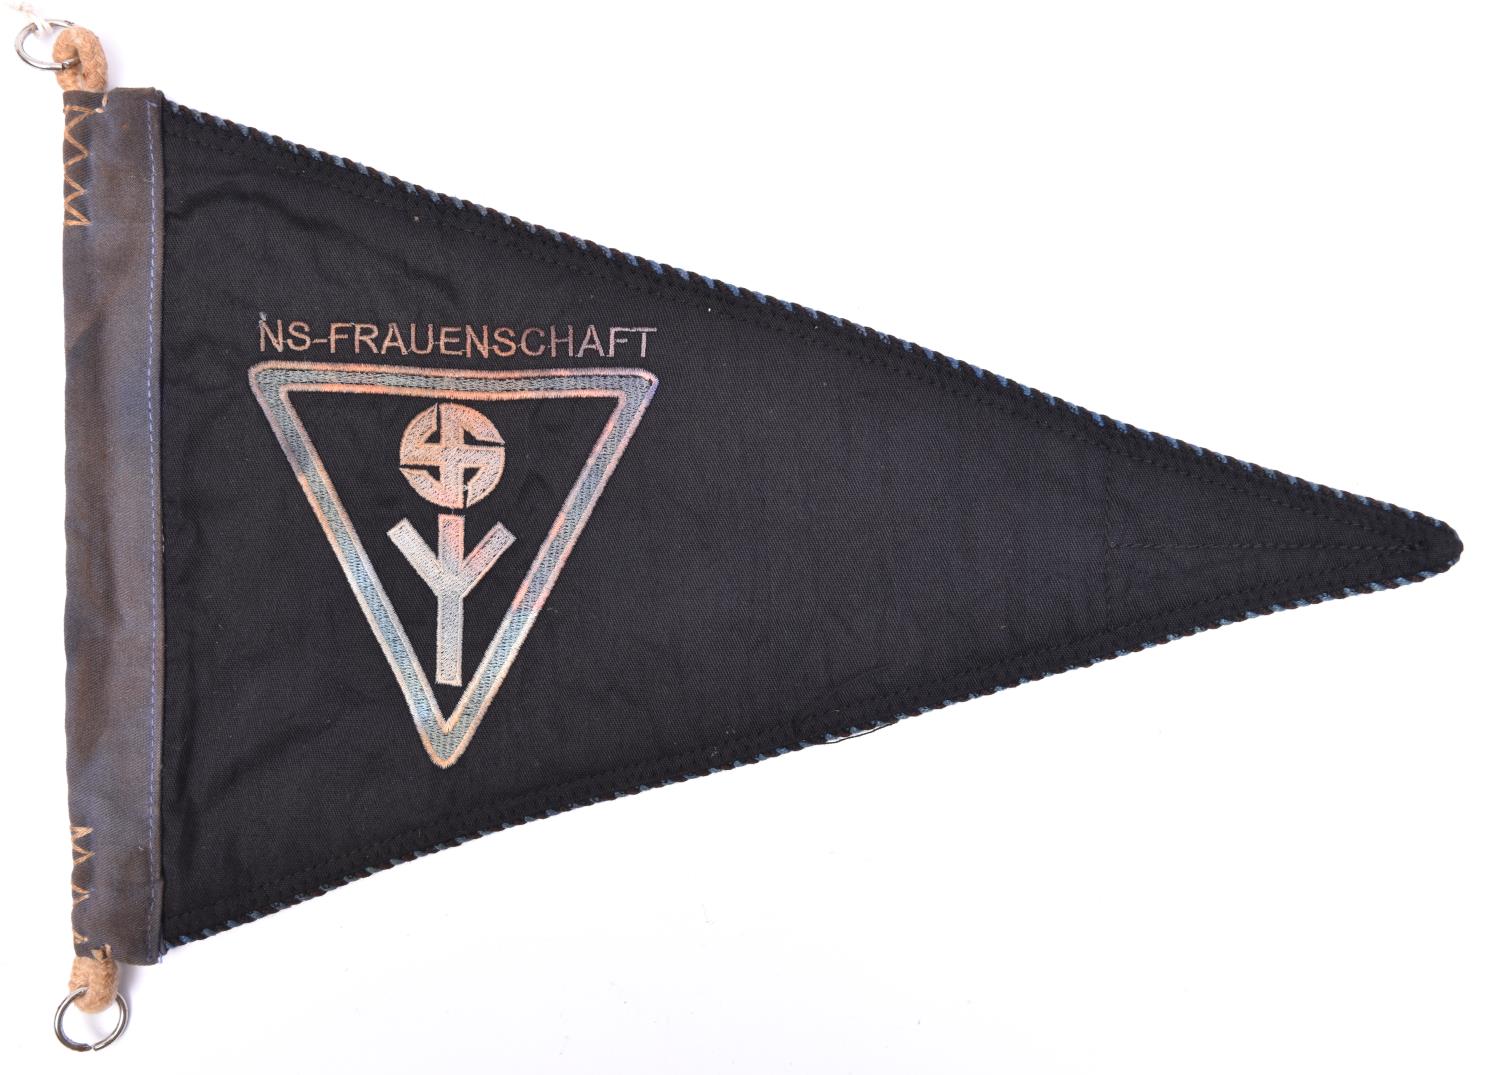 A Third Reich NS Frauenschaft Vehicle pennant, 14" x 10", black cloth with Bevo style embroidery. GC